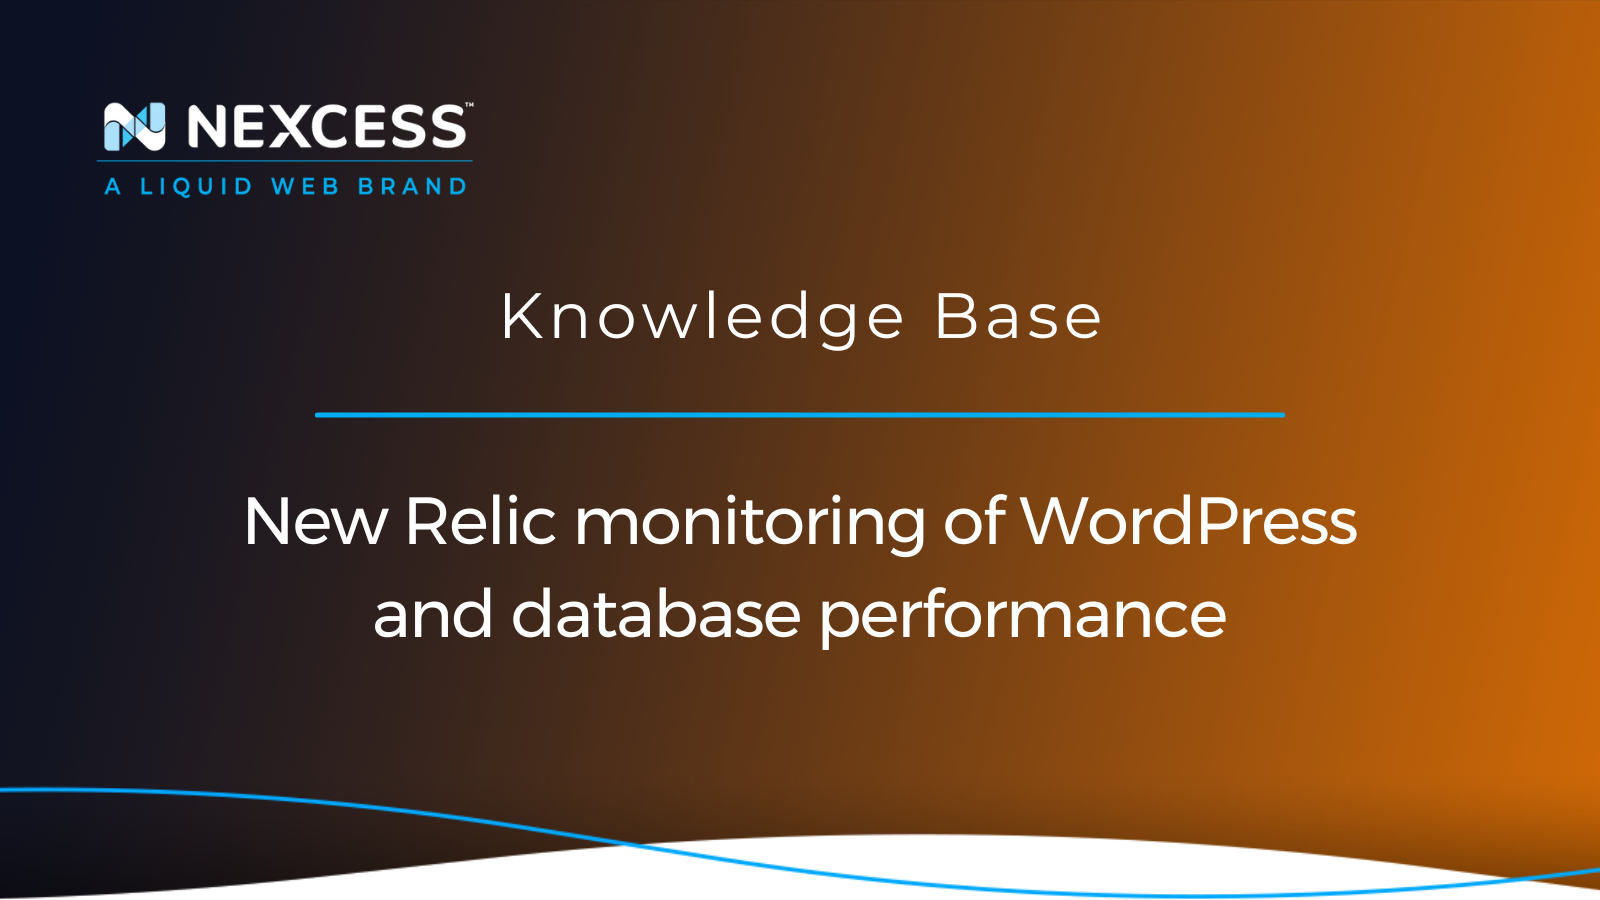 New Relic monitoring of WordPress and database performance